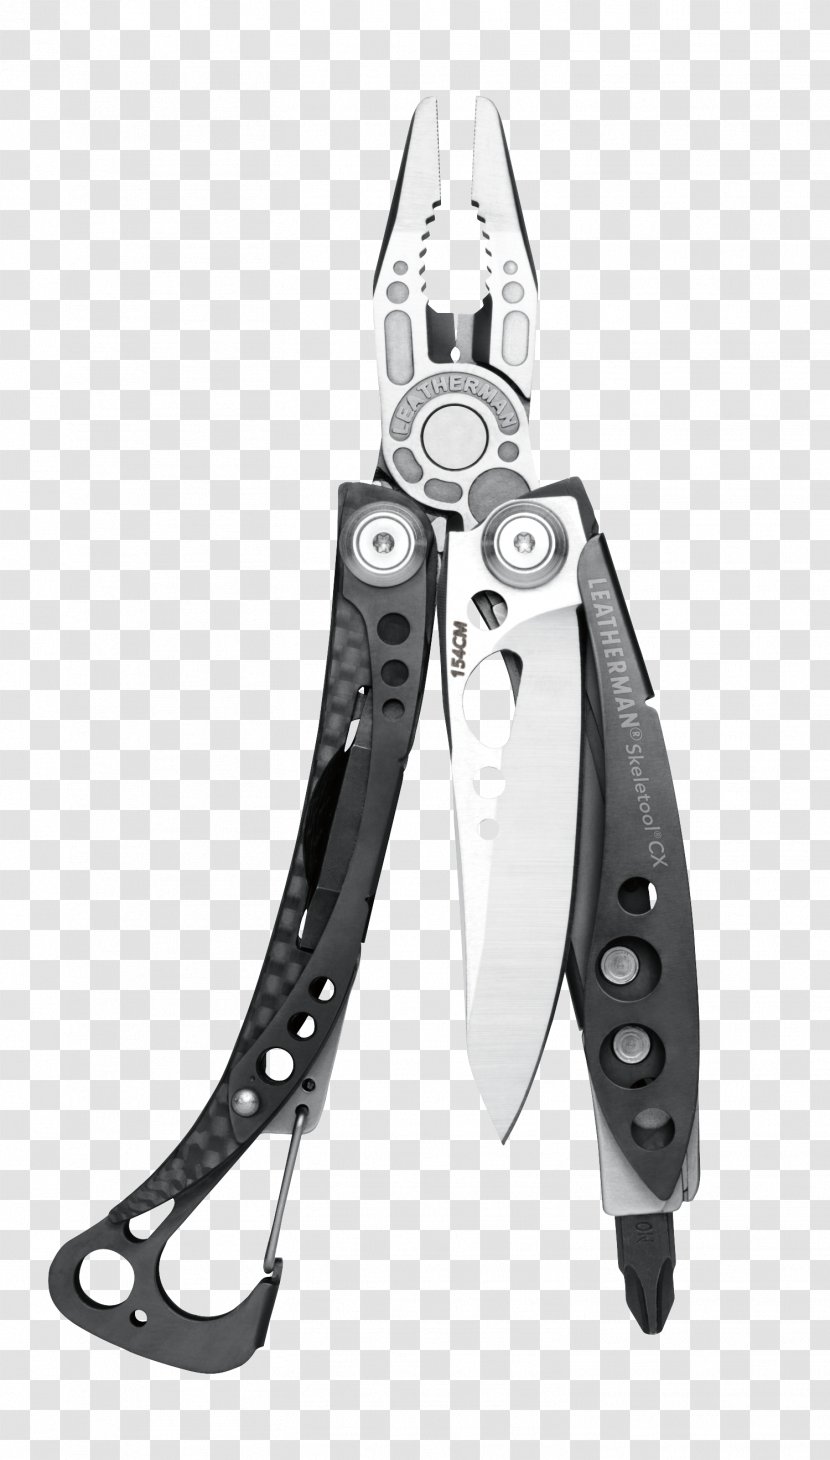 Multi-function Tools & Knives Leatherman 154CM Needle-nose Pliers - Needlenose - Bottle Openers Transparent PNG